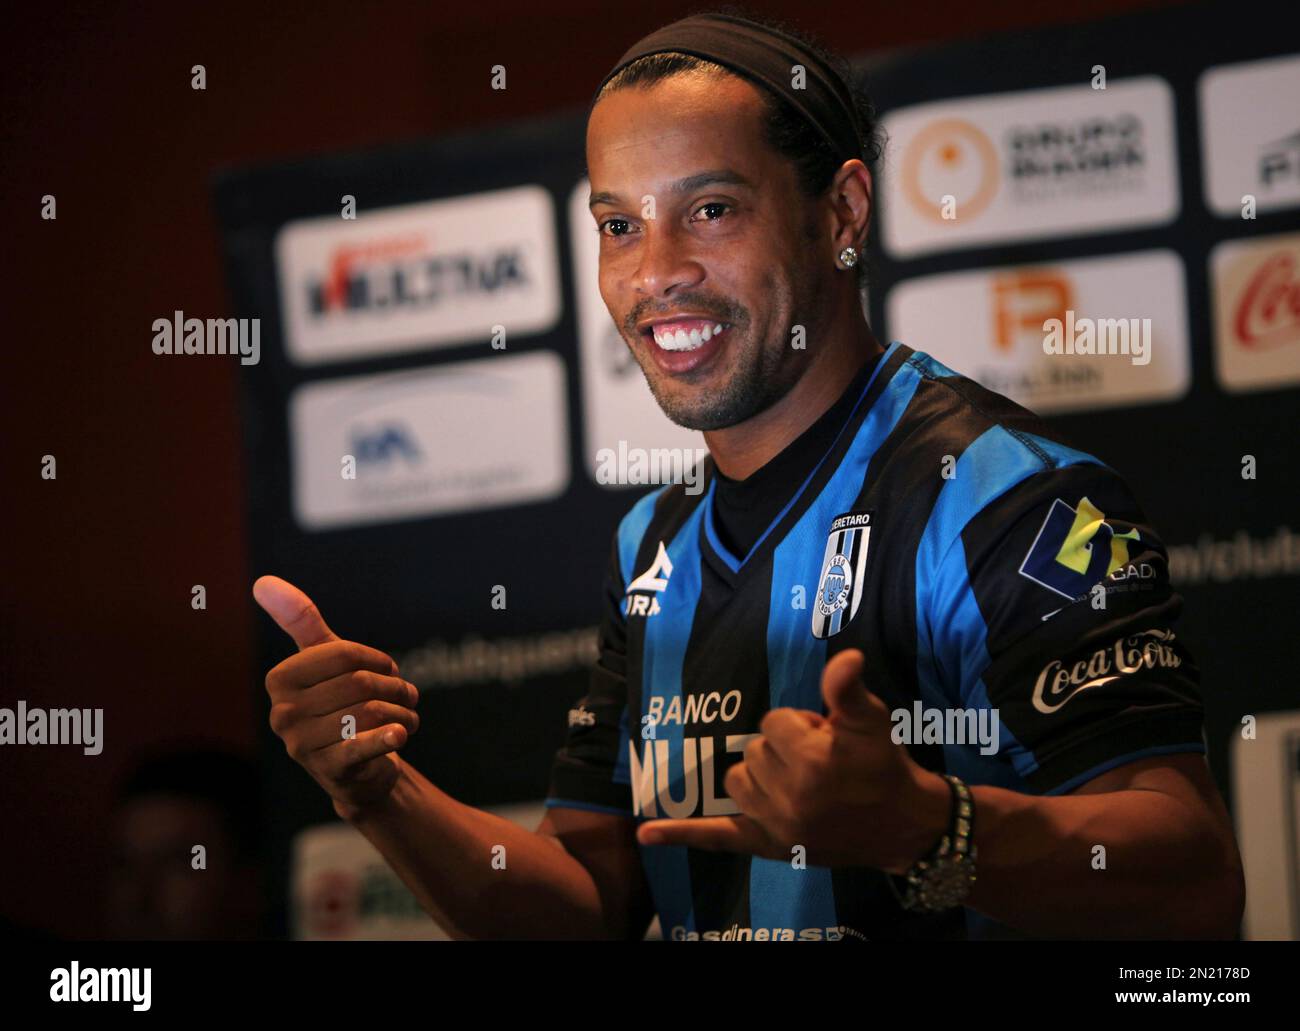 FILE - In this Sept. 12, 2014 file photo, Brazil's Ronaldinho poses for a  photo after slipping on his new Queretaro soccer club jersey at a press  conference in Mexico City. Fluminense